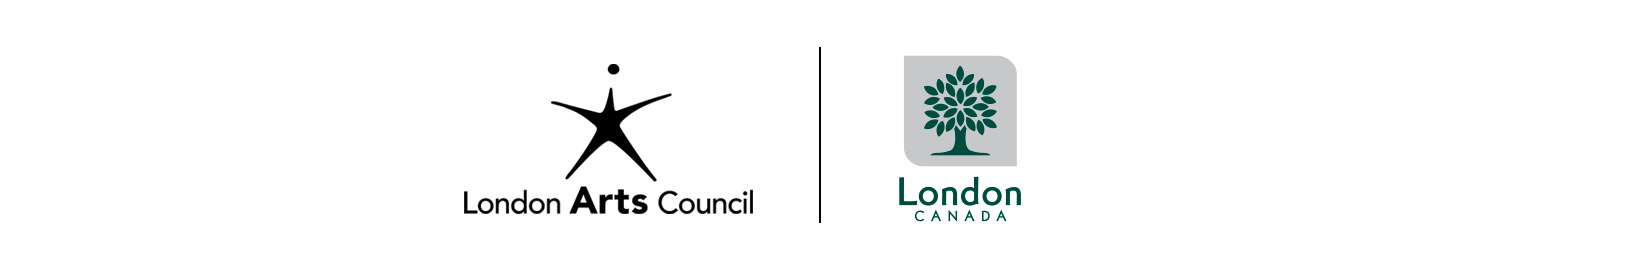 London Arts Council and The City of London